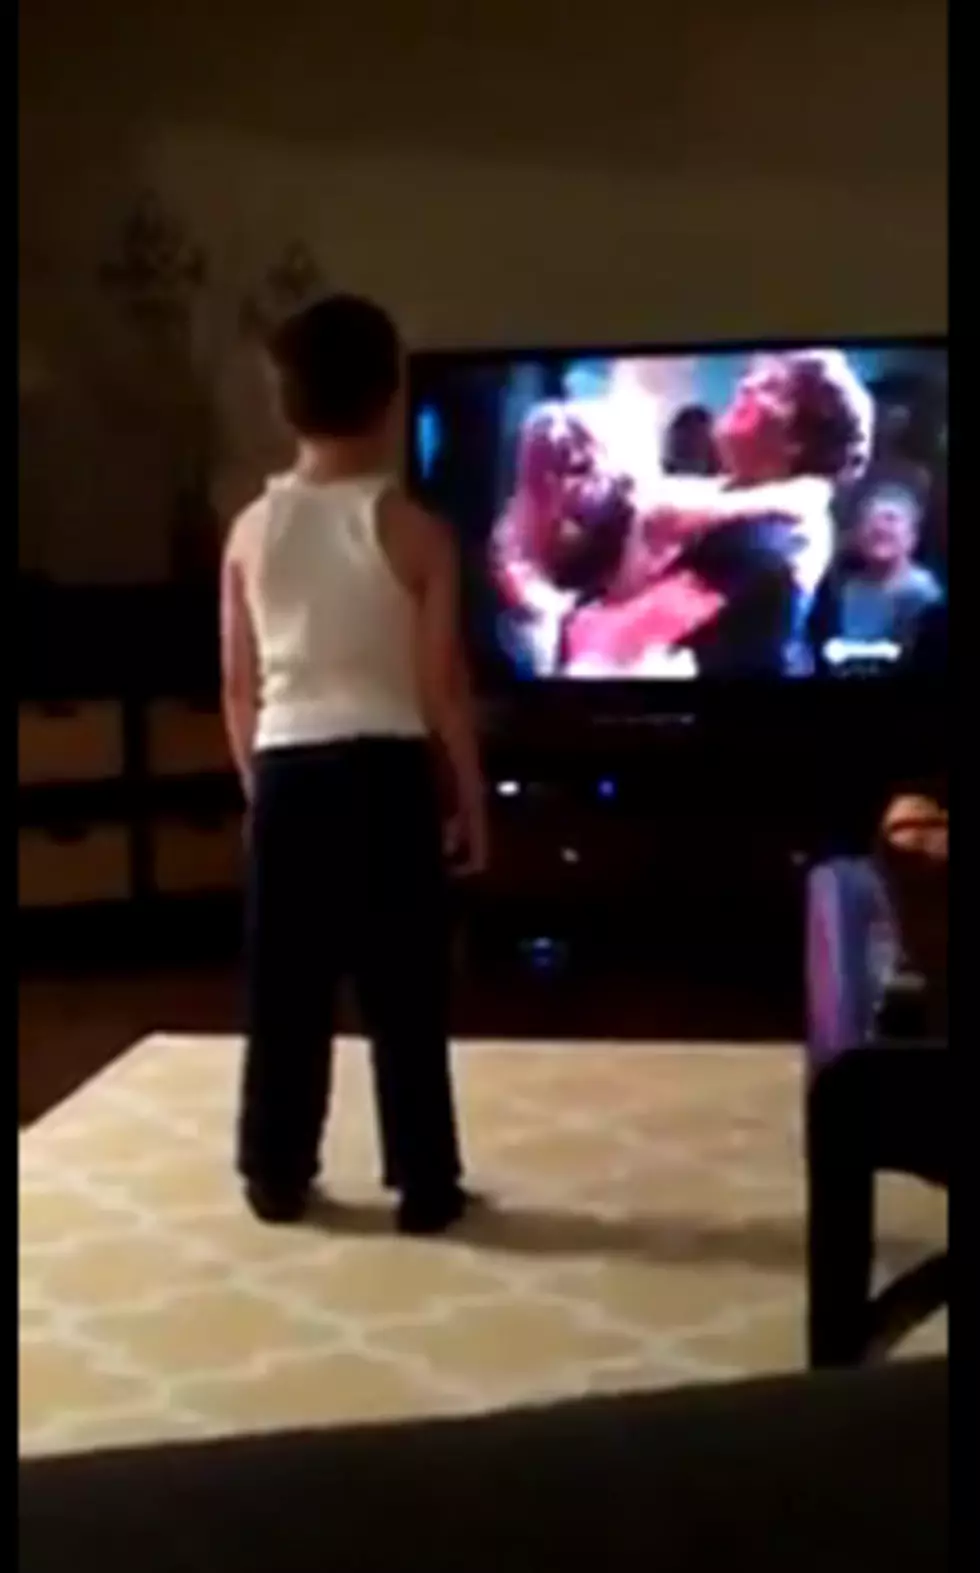 Watch This Kid Bust A Move To ‘Dirty Dancing’ [Video]